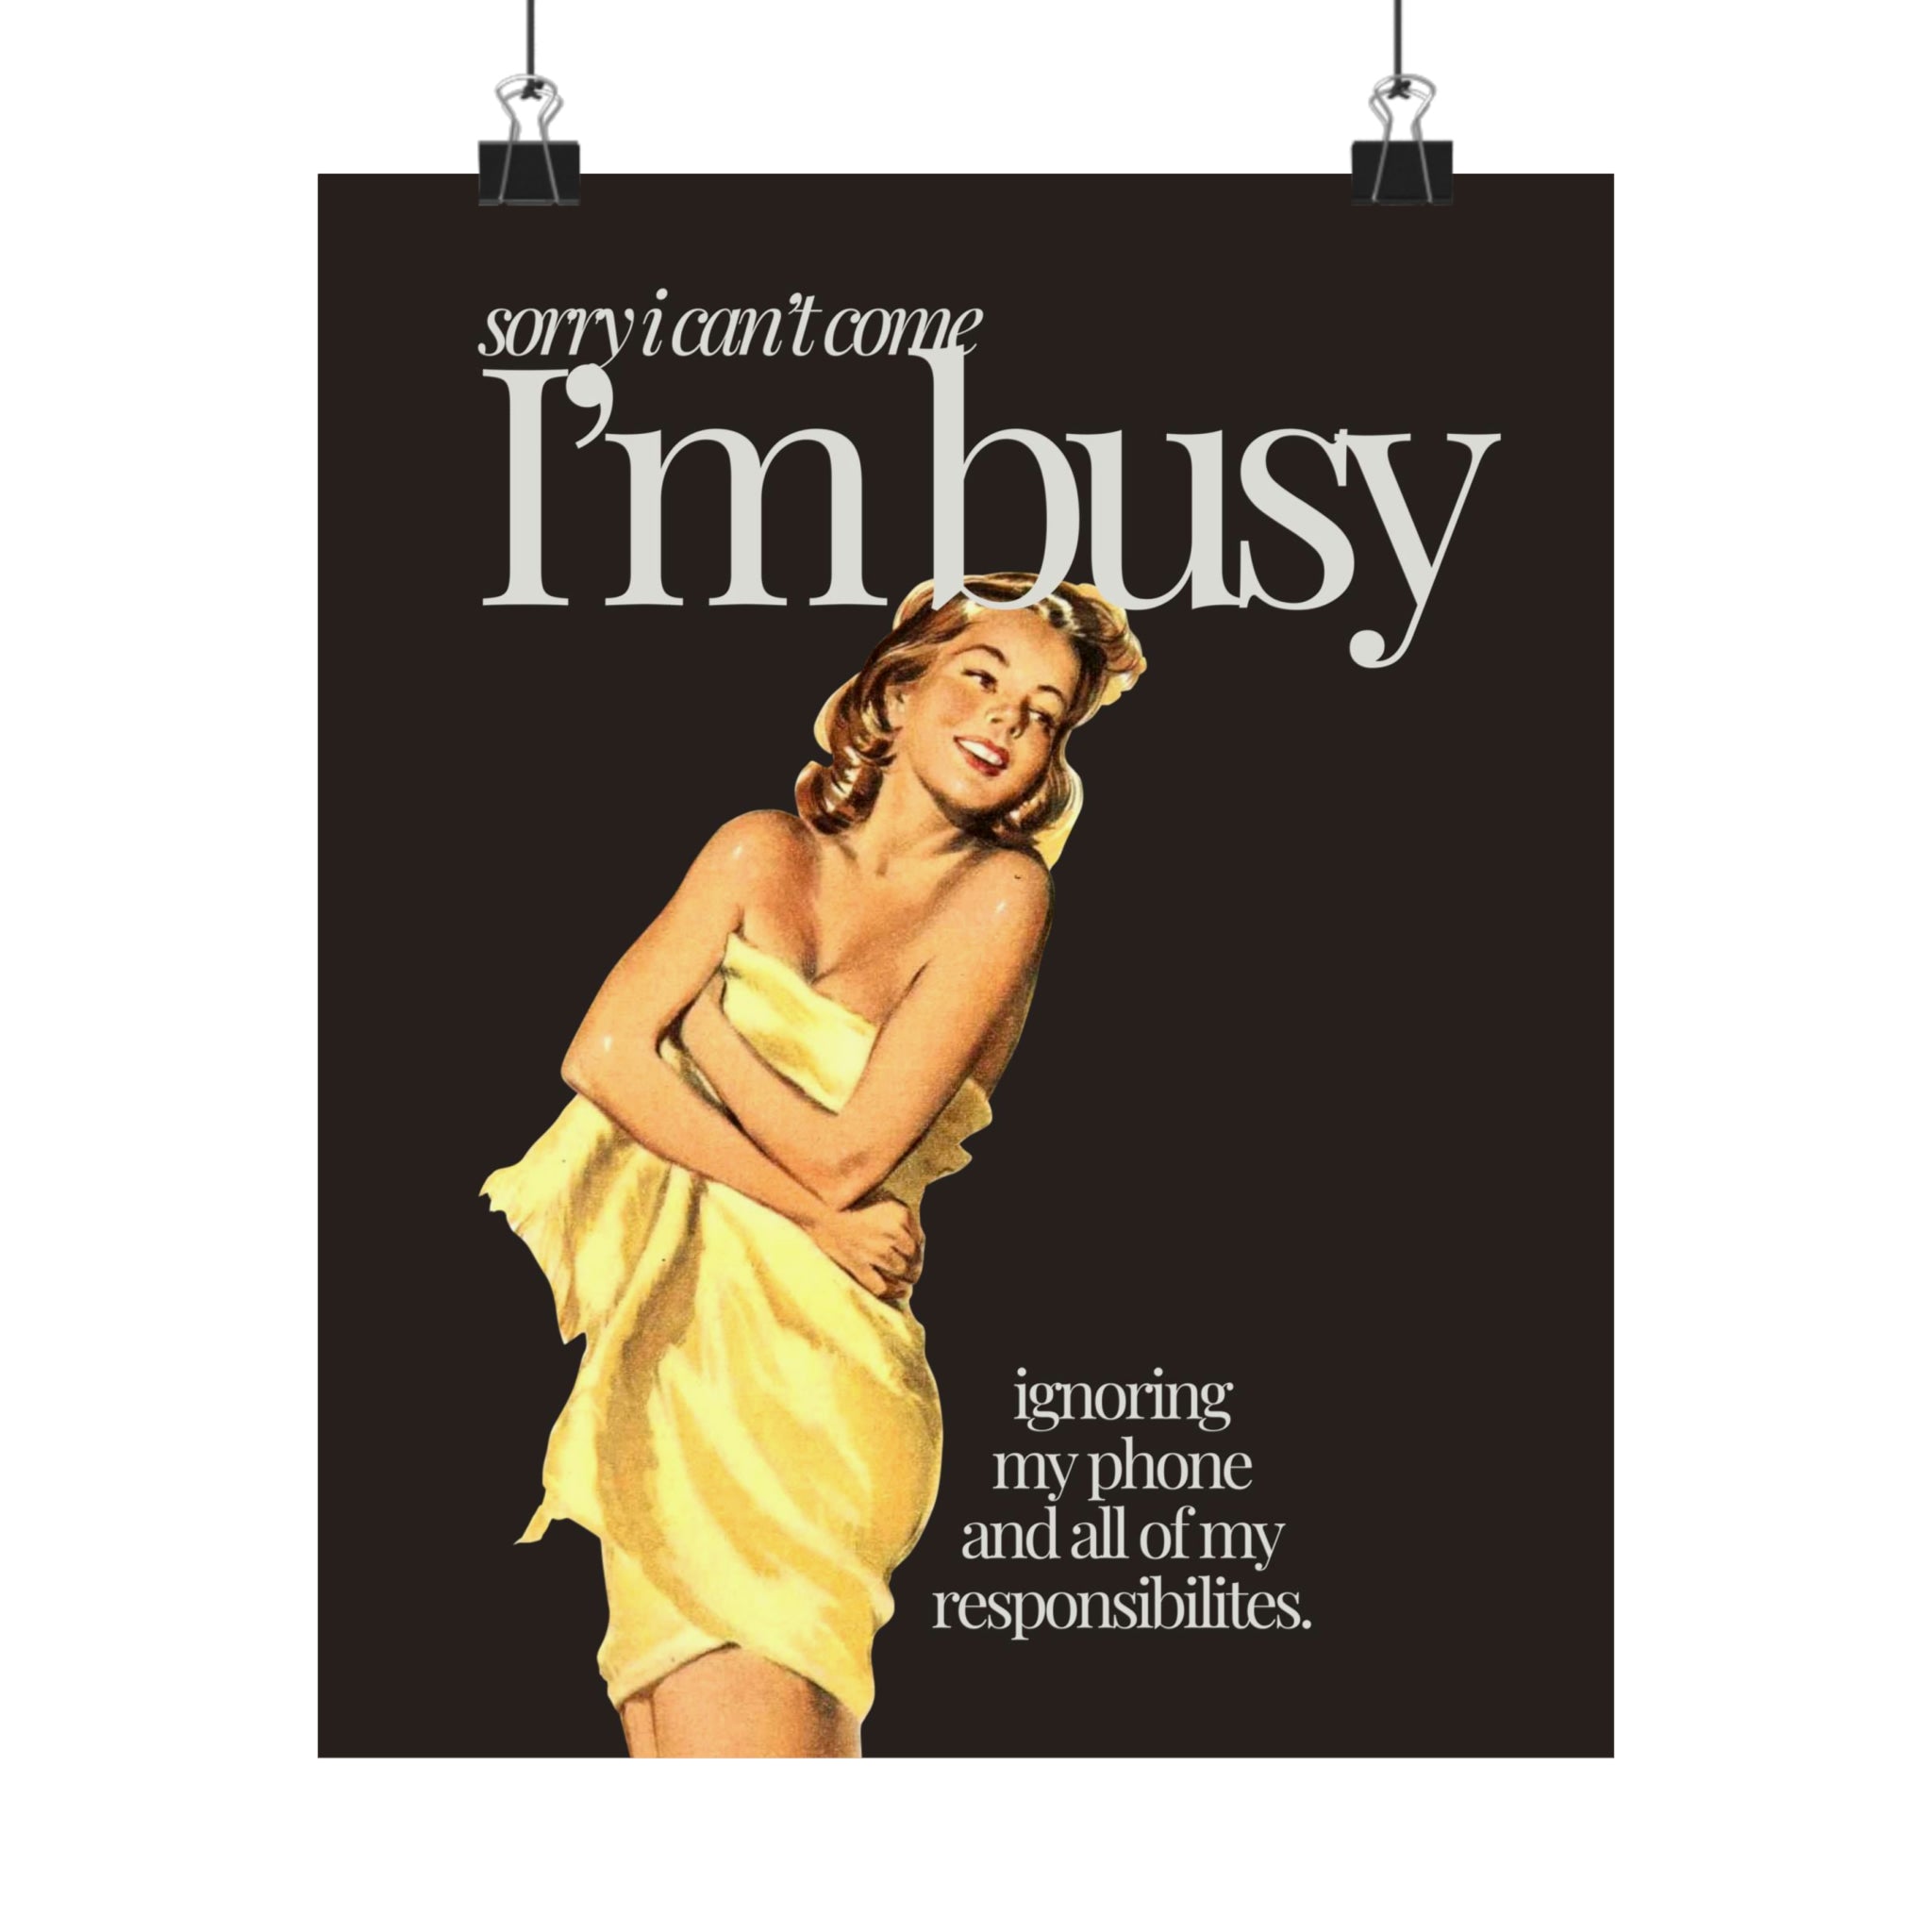 I'm Busy Physical Poster